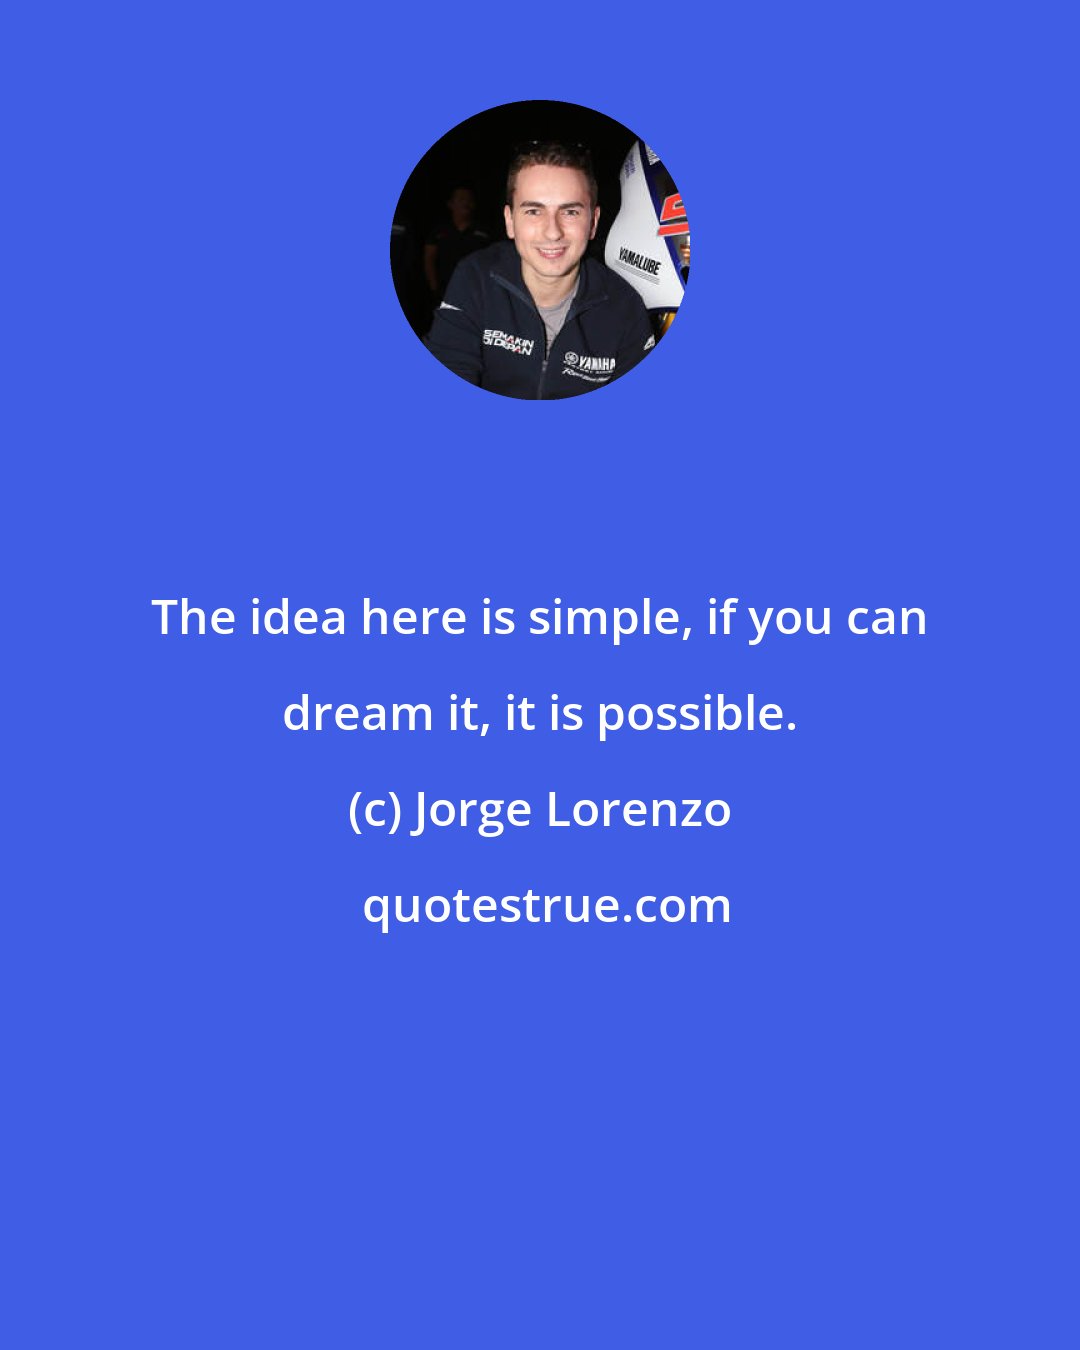 Jorge Lorenzo: The idea here is simple, if you can dream it, it is possible.